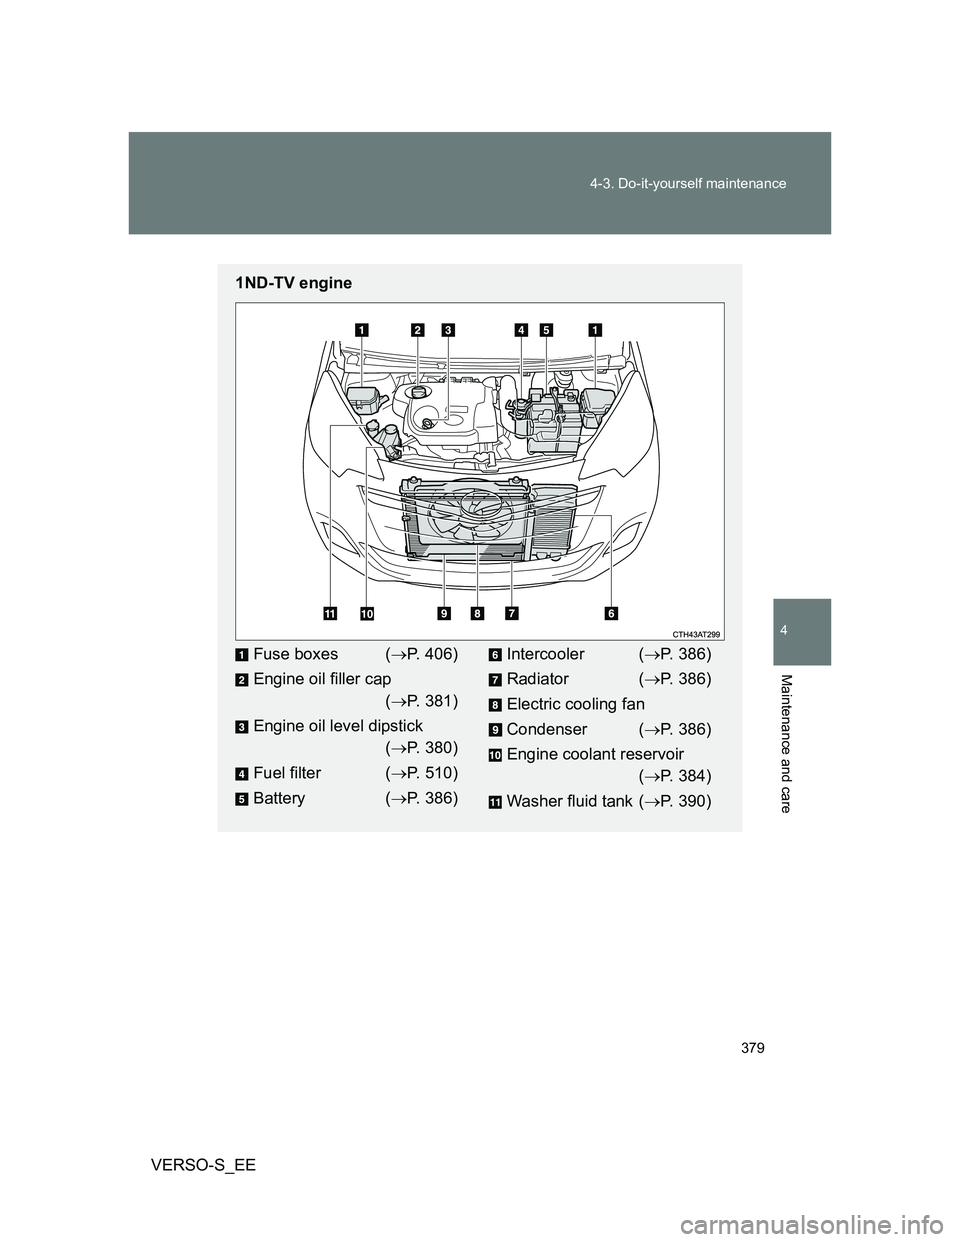 TOYOTA VERSO S 2014  Owners Manual 379 4-3. Do-it-yourself maintenance
4
Maintenance and care
VERSO-S_EE
1ND-TV engine
Fuse boxes (P. 406)
Engine oil filler cap
(P. 381)
Engine oil level dipstick
(P. 380)
Fuel filter (P. 51